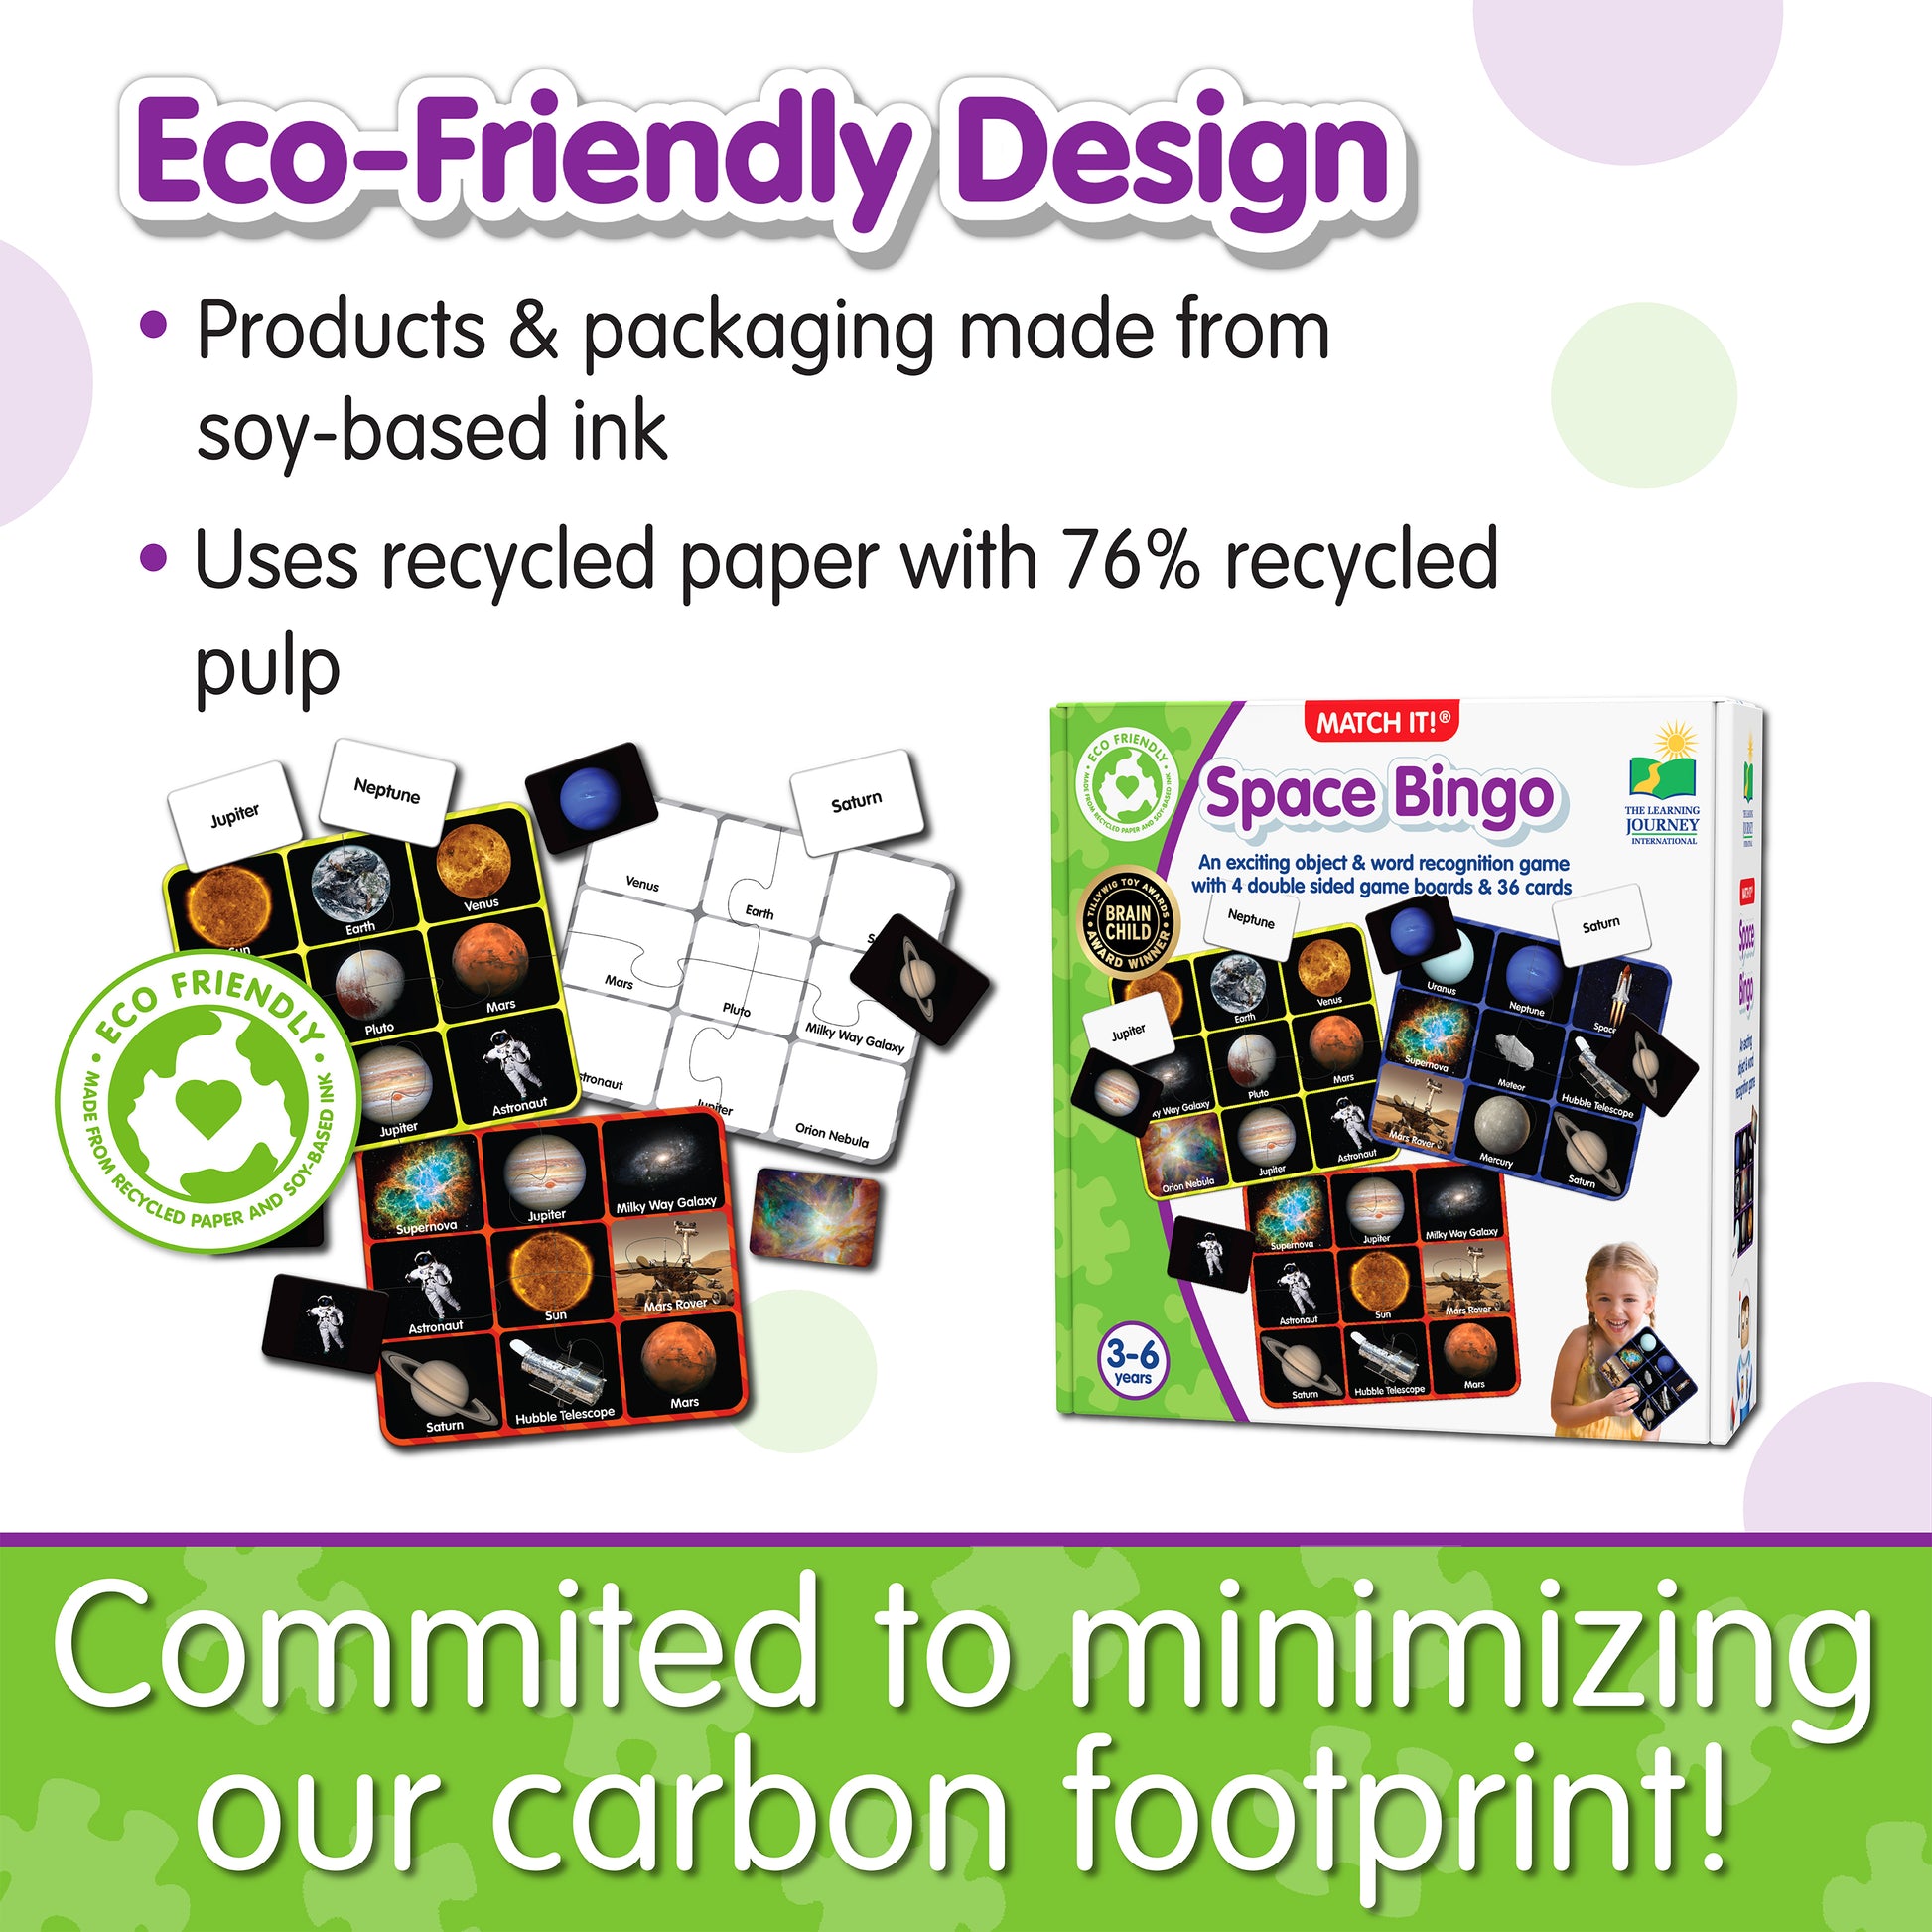 Infographic about Match It - Space Bingo's eco-friendly design that says, "Committed to minimizing our carbon footprint!"